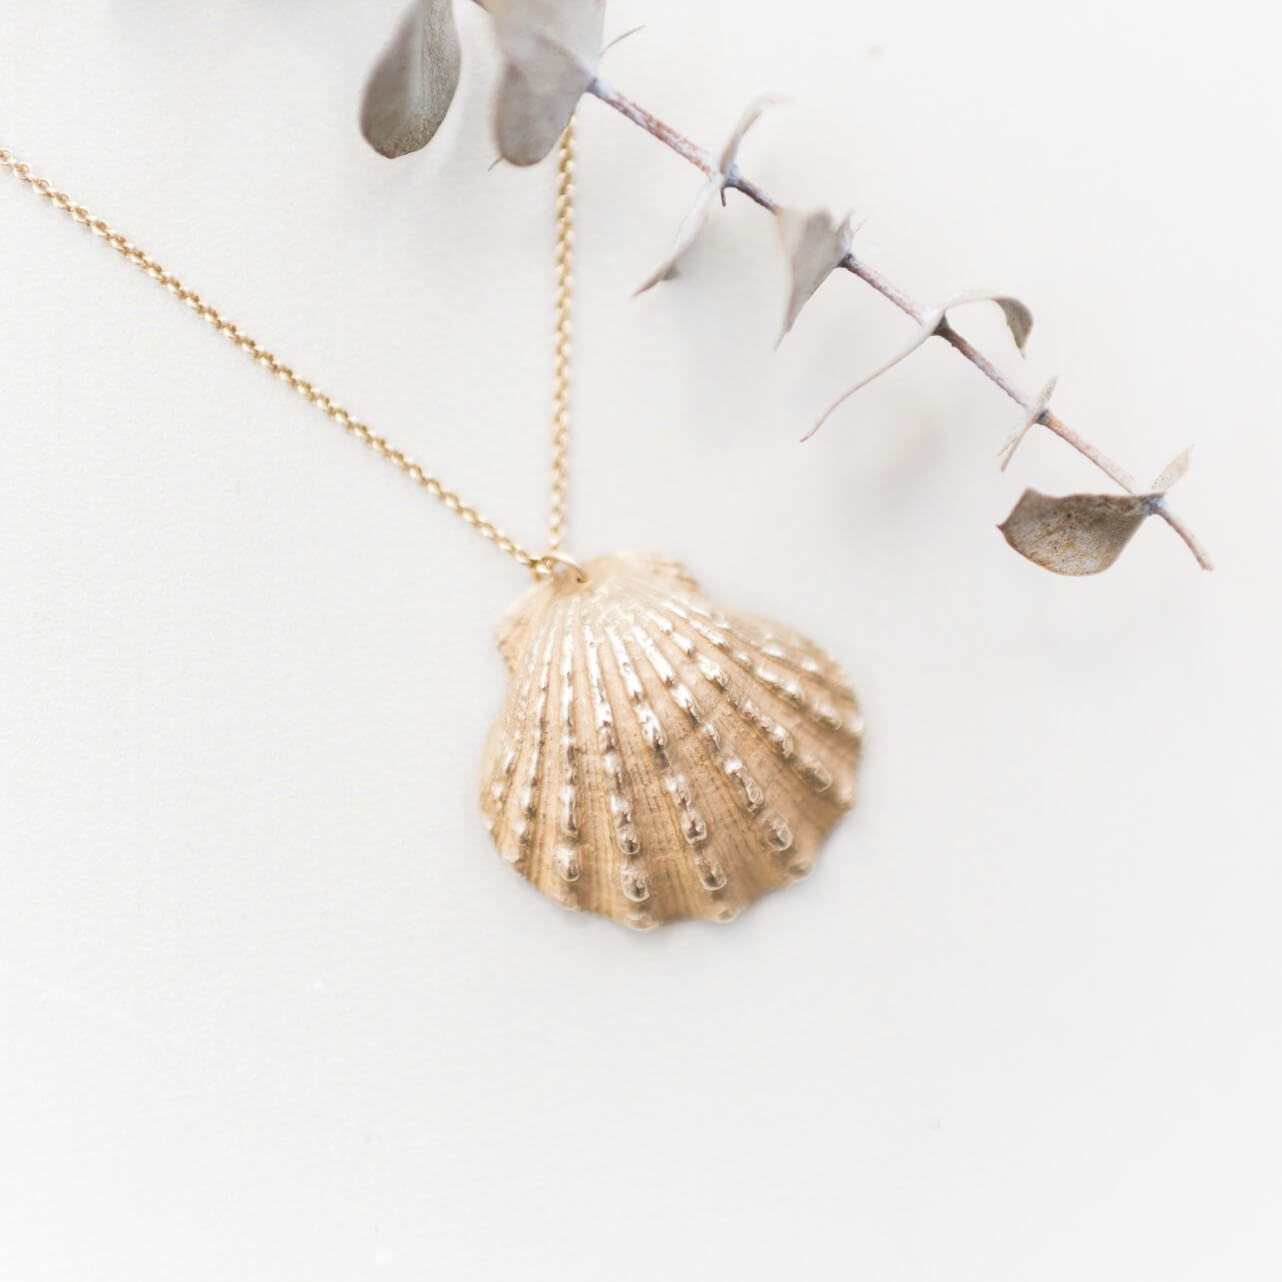 beautiful, calming image of a scallop shell cast in golden bronze on a white background.